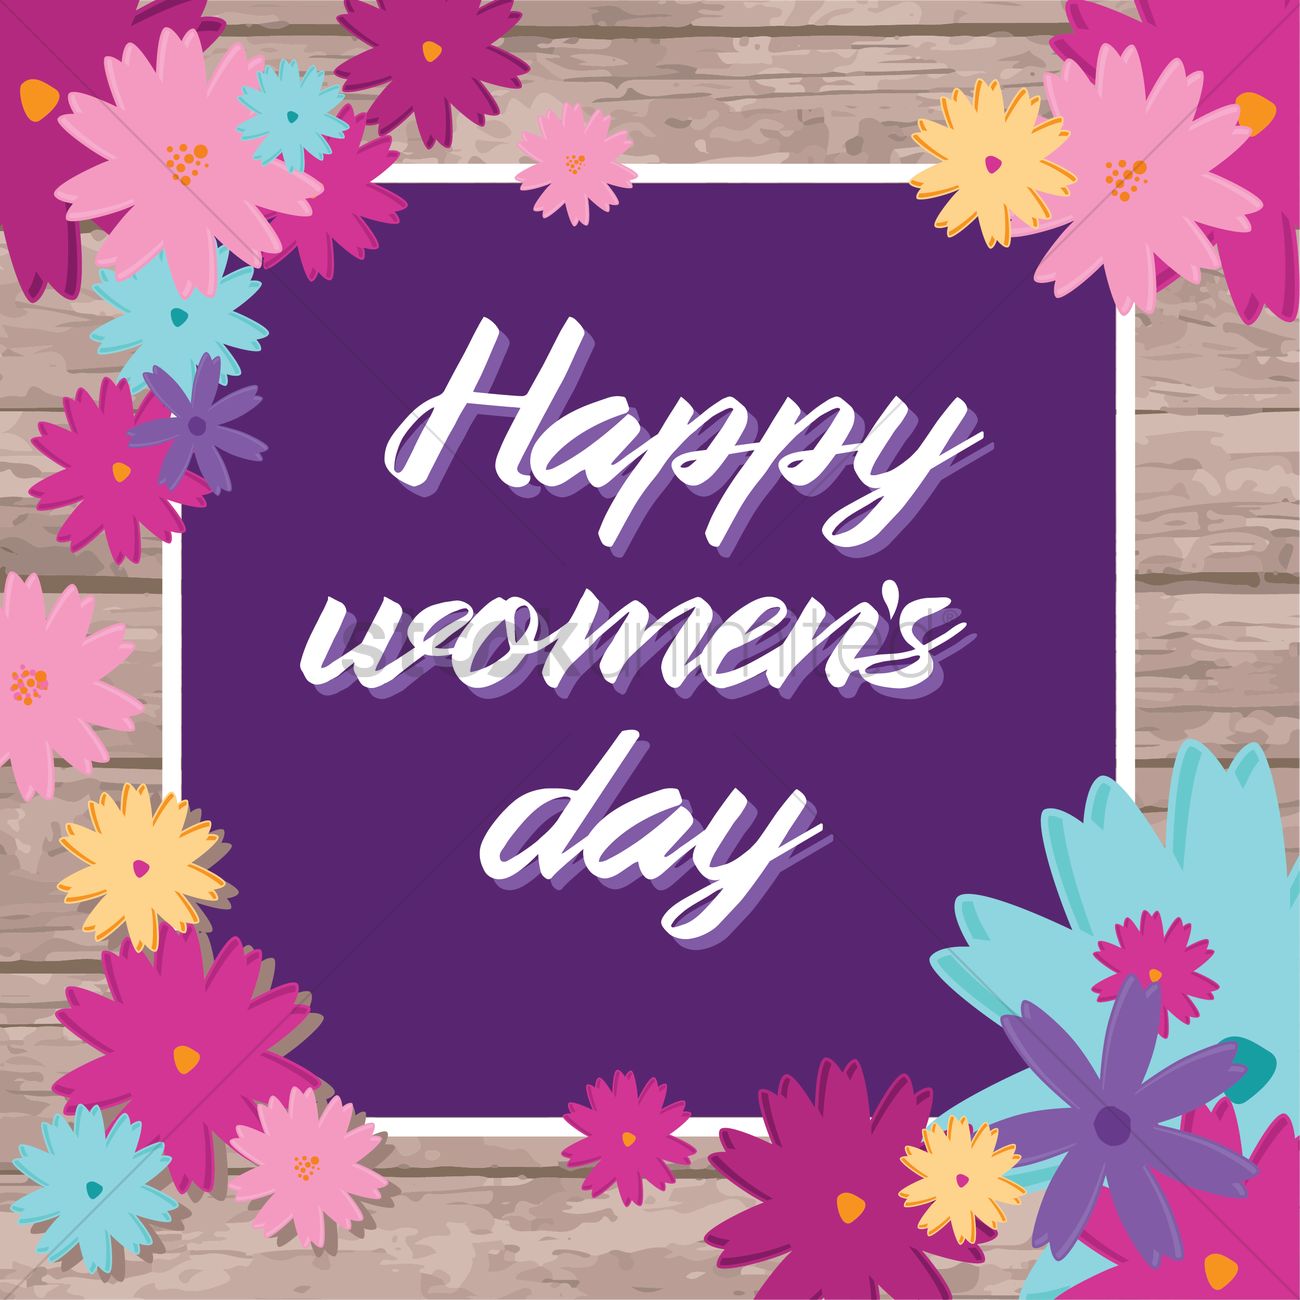 Women's Day greeting, with abstract flowers